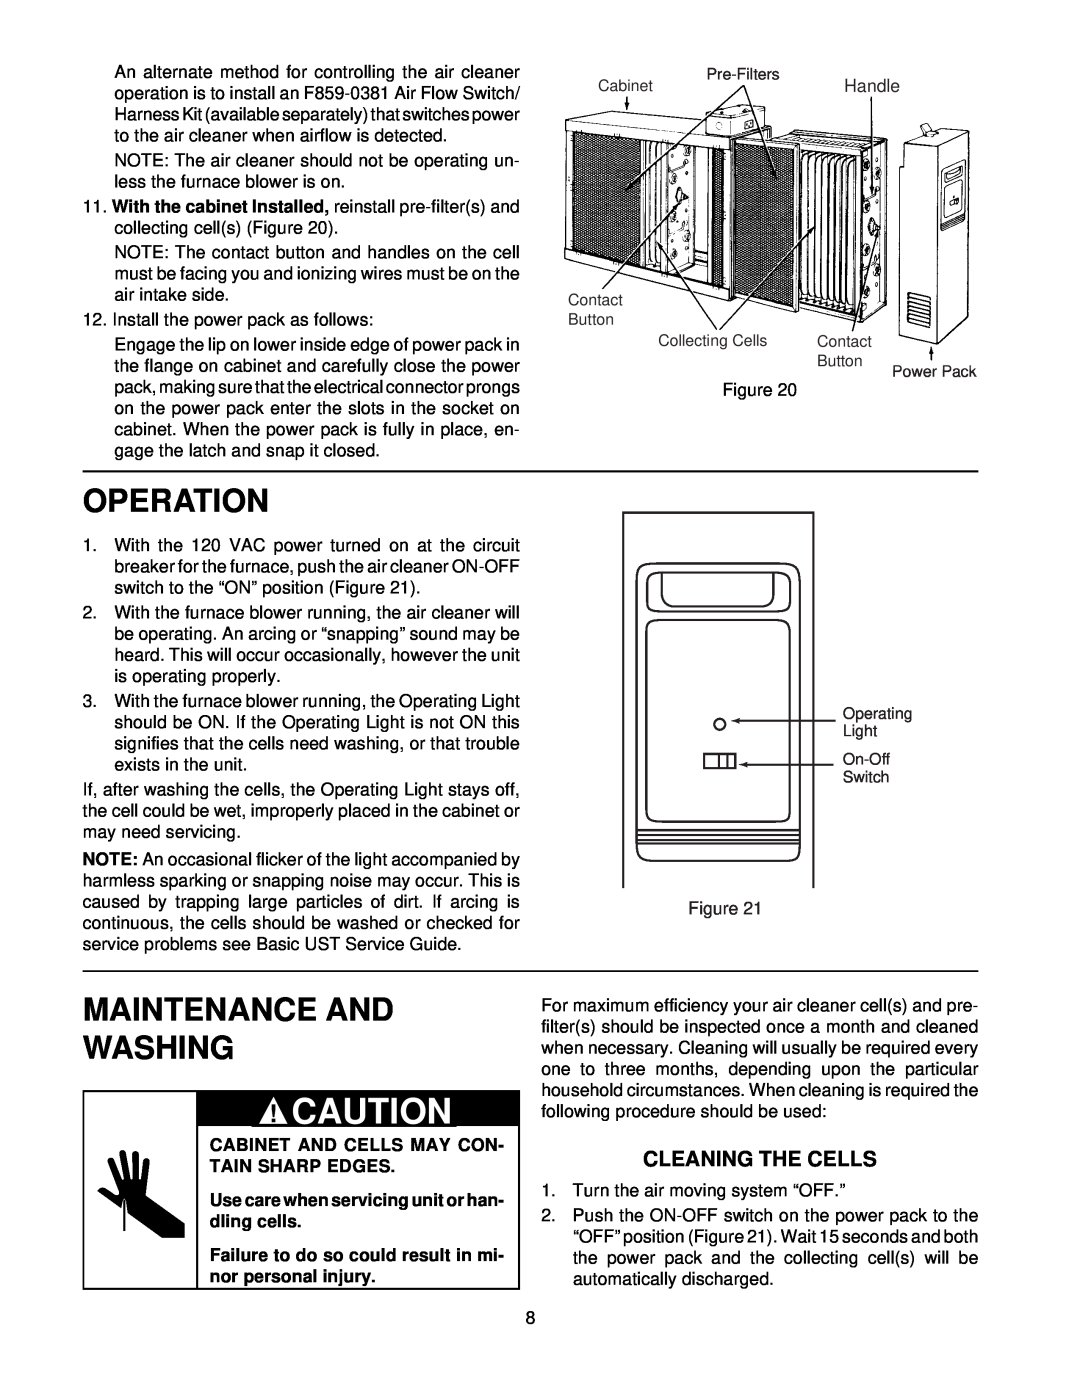 Emerson 16C26S-010 owner manual Operation, Maintenance And Washing, Cleaning The Cells 